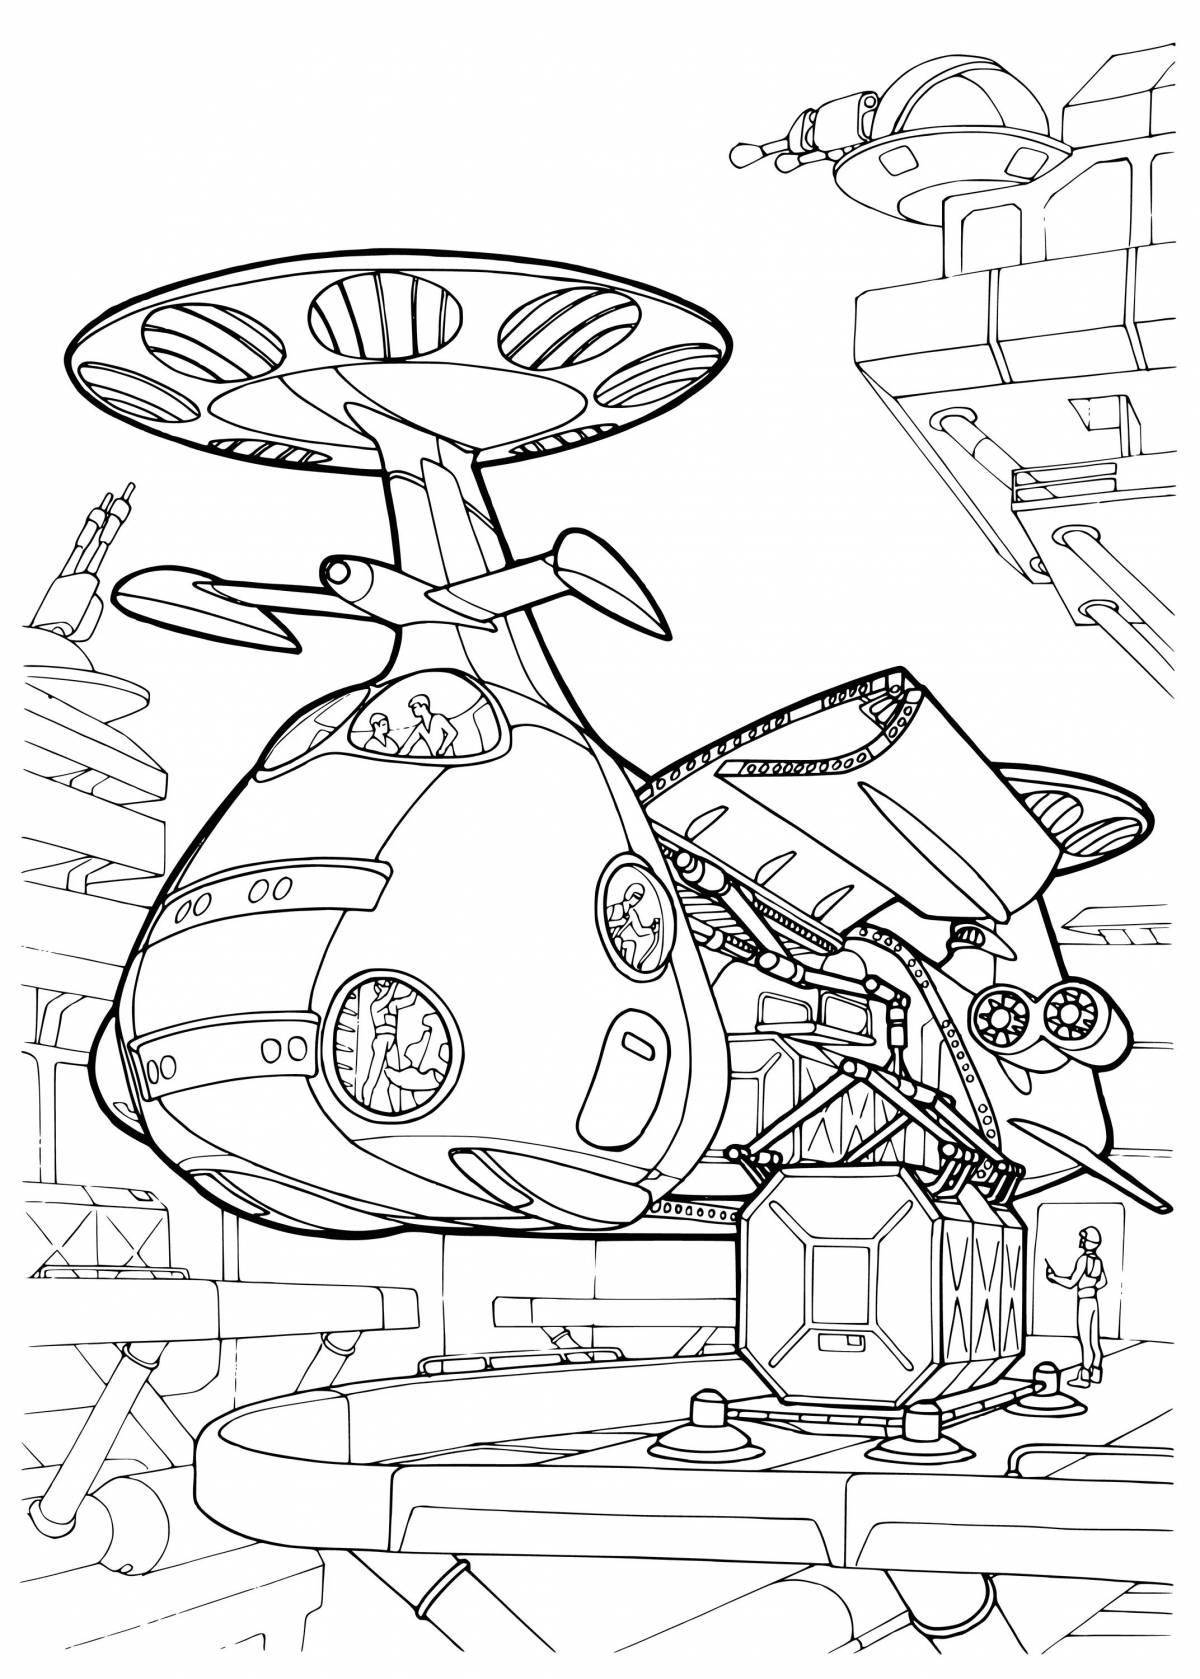 Coloring page rampant space city